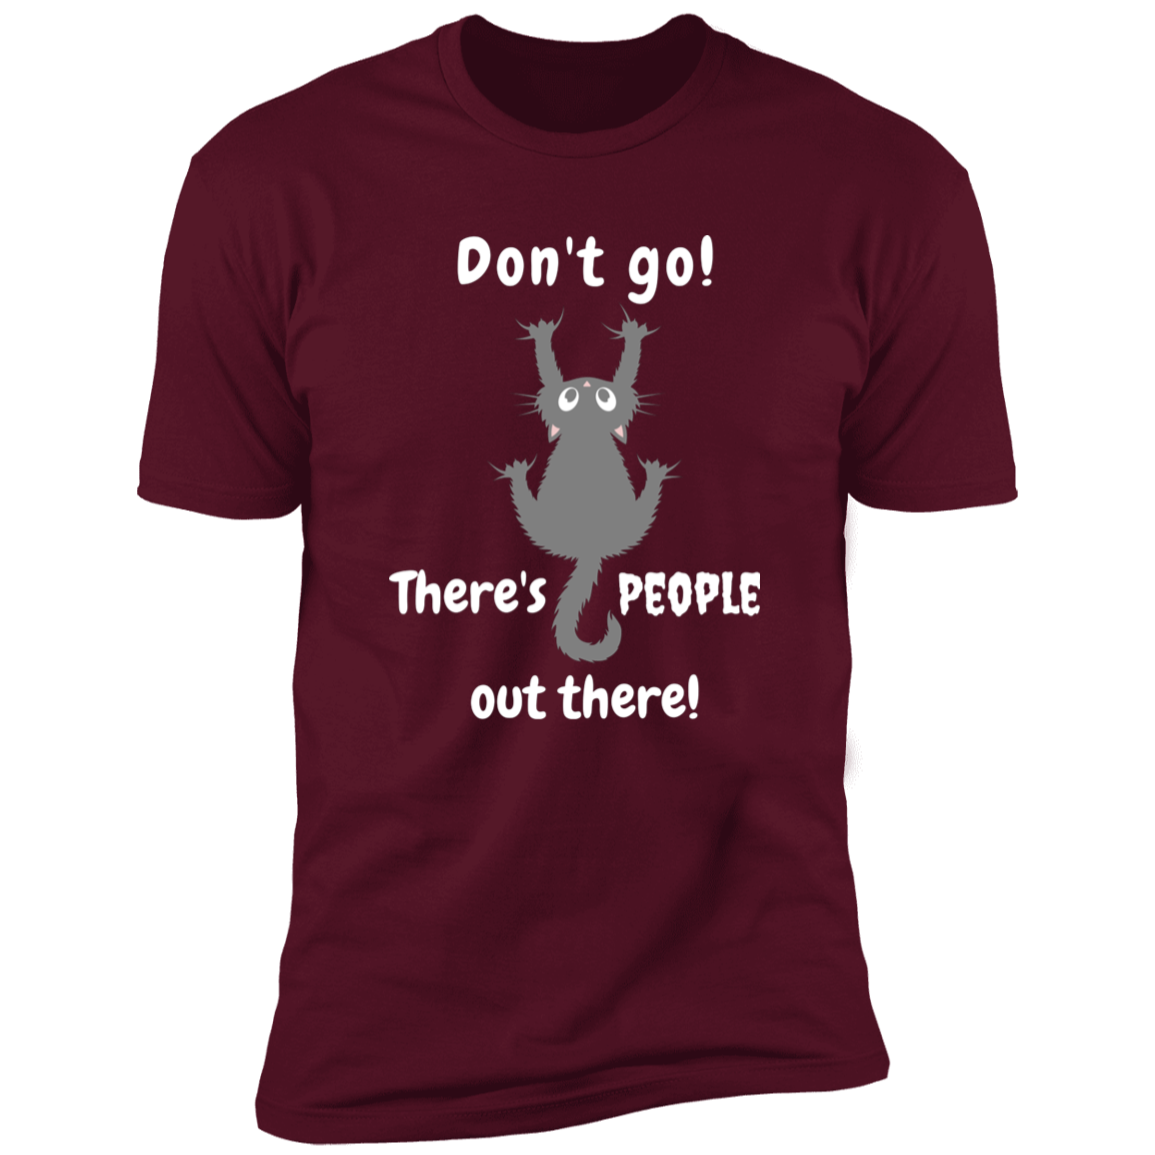 Don't Go! There are People Out there Shirt, funny cat shirt for humans, cat mom and cat dad shirt, in maroon